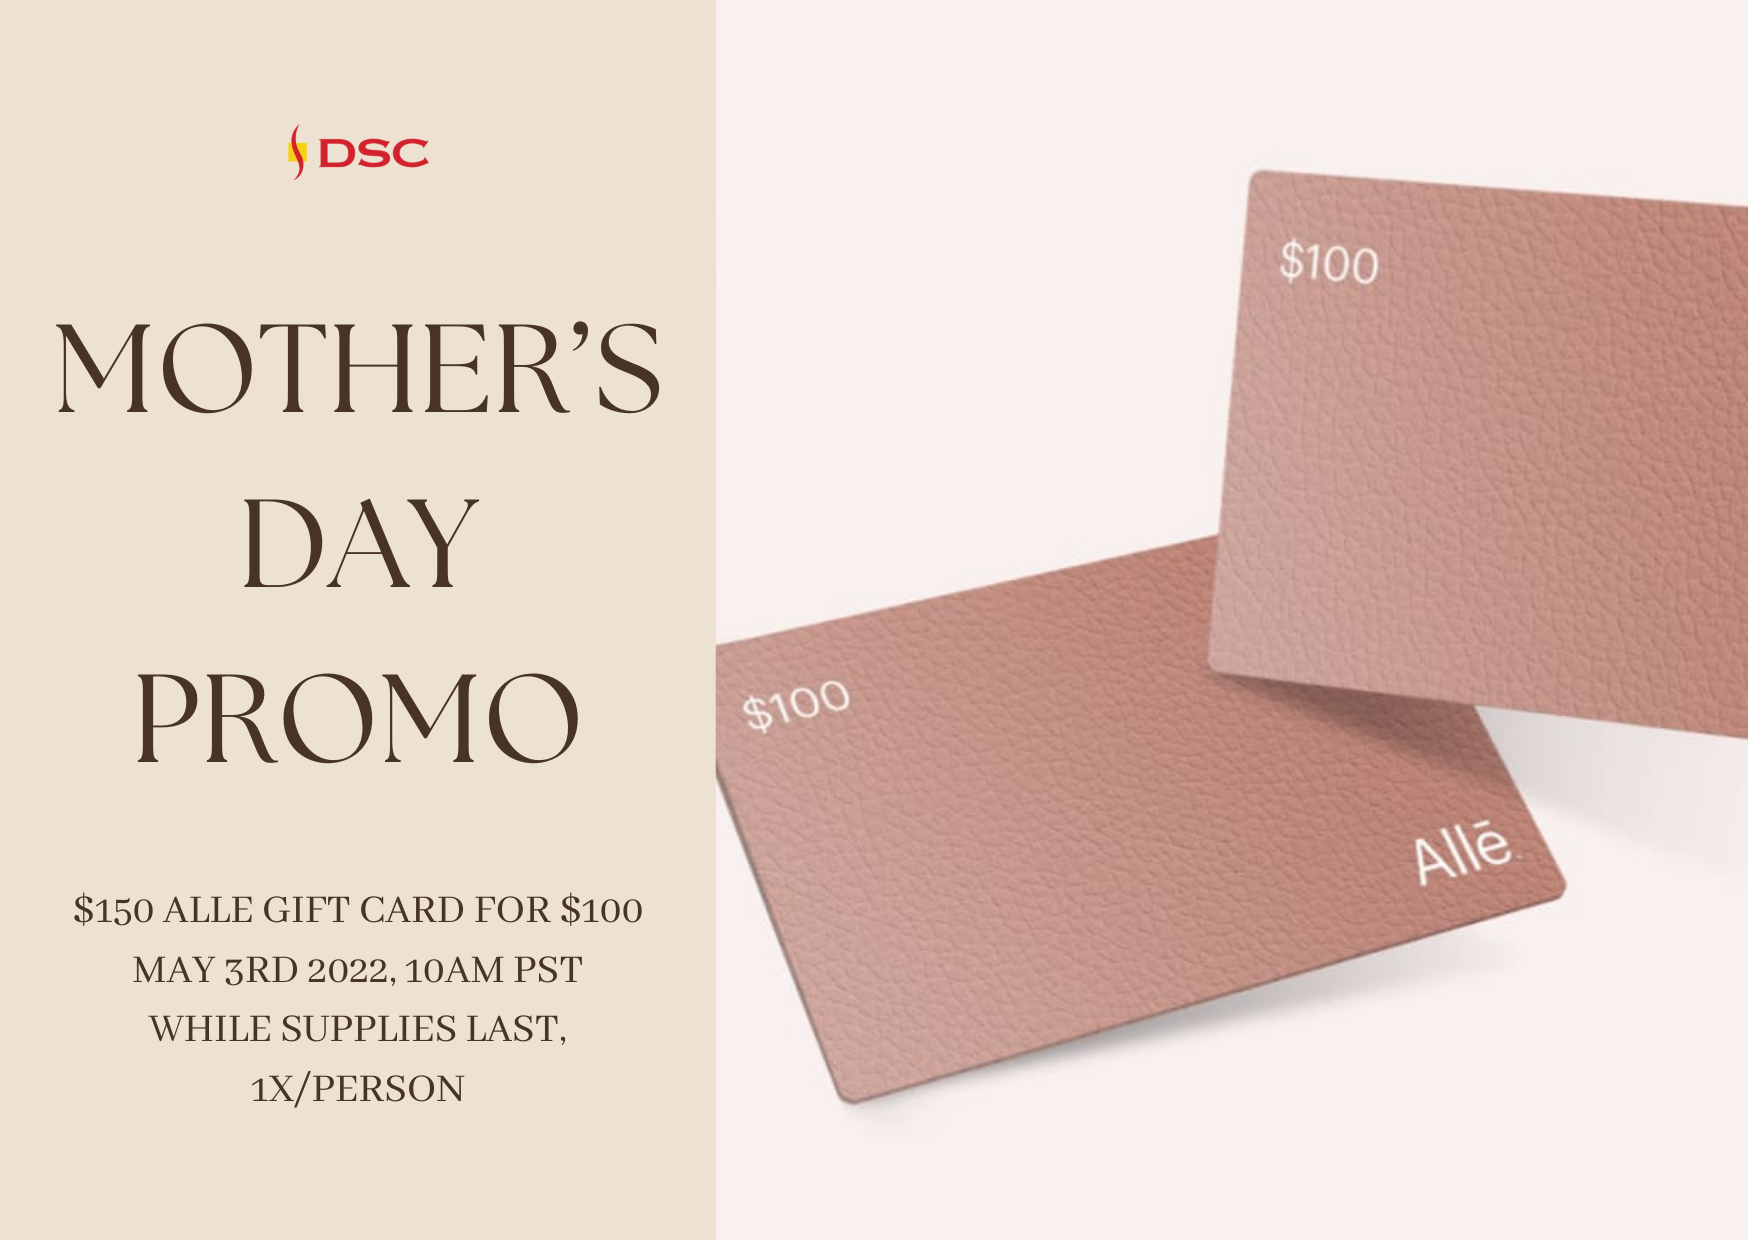 DSC Alle Mother’s Day May 3rd 2022 Gift Card Flash Sale 10AM PST